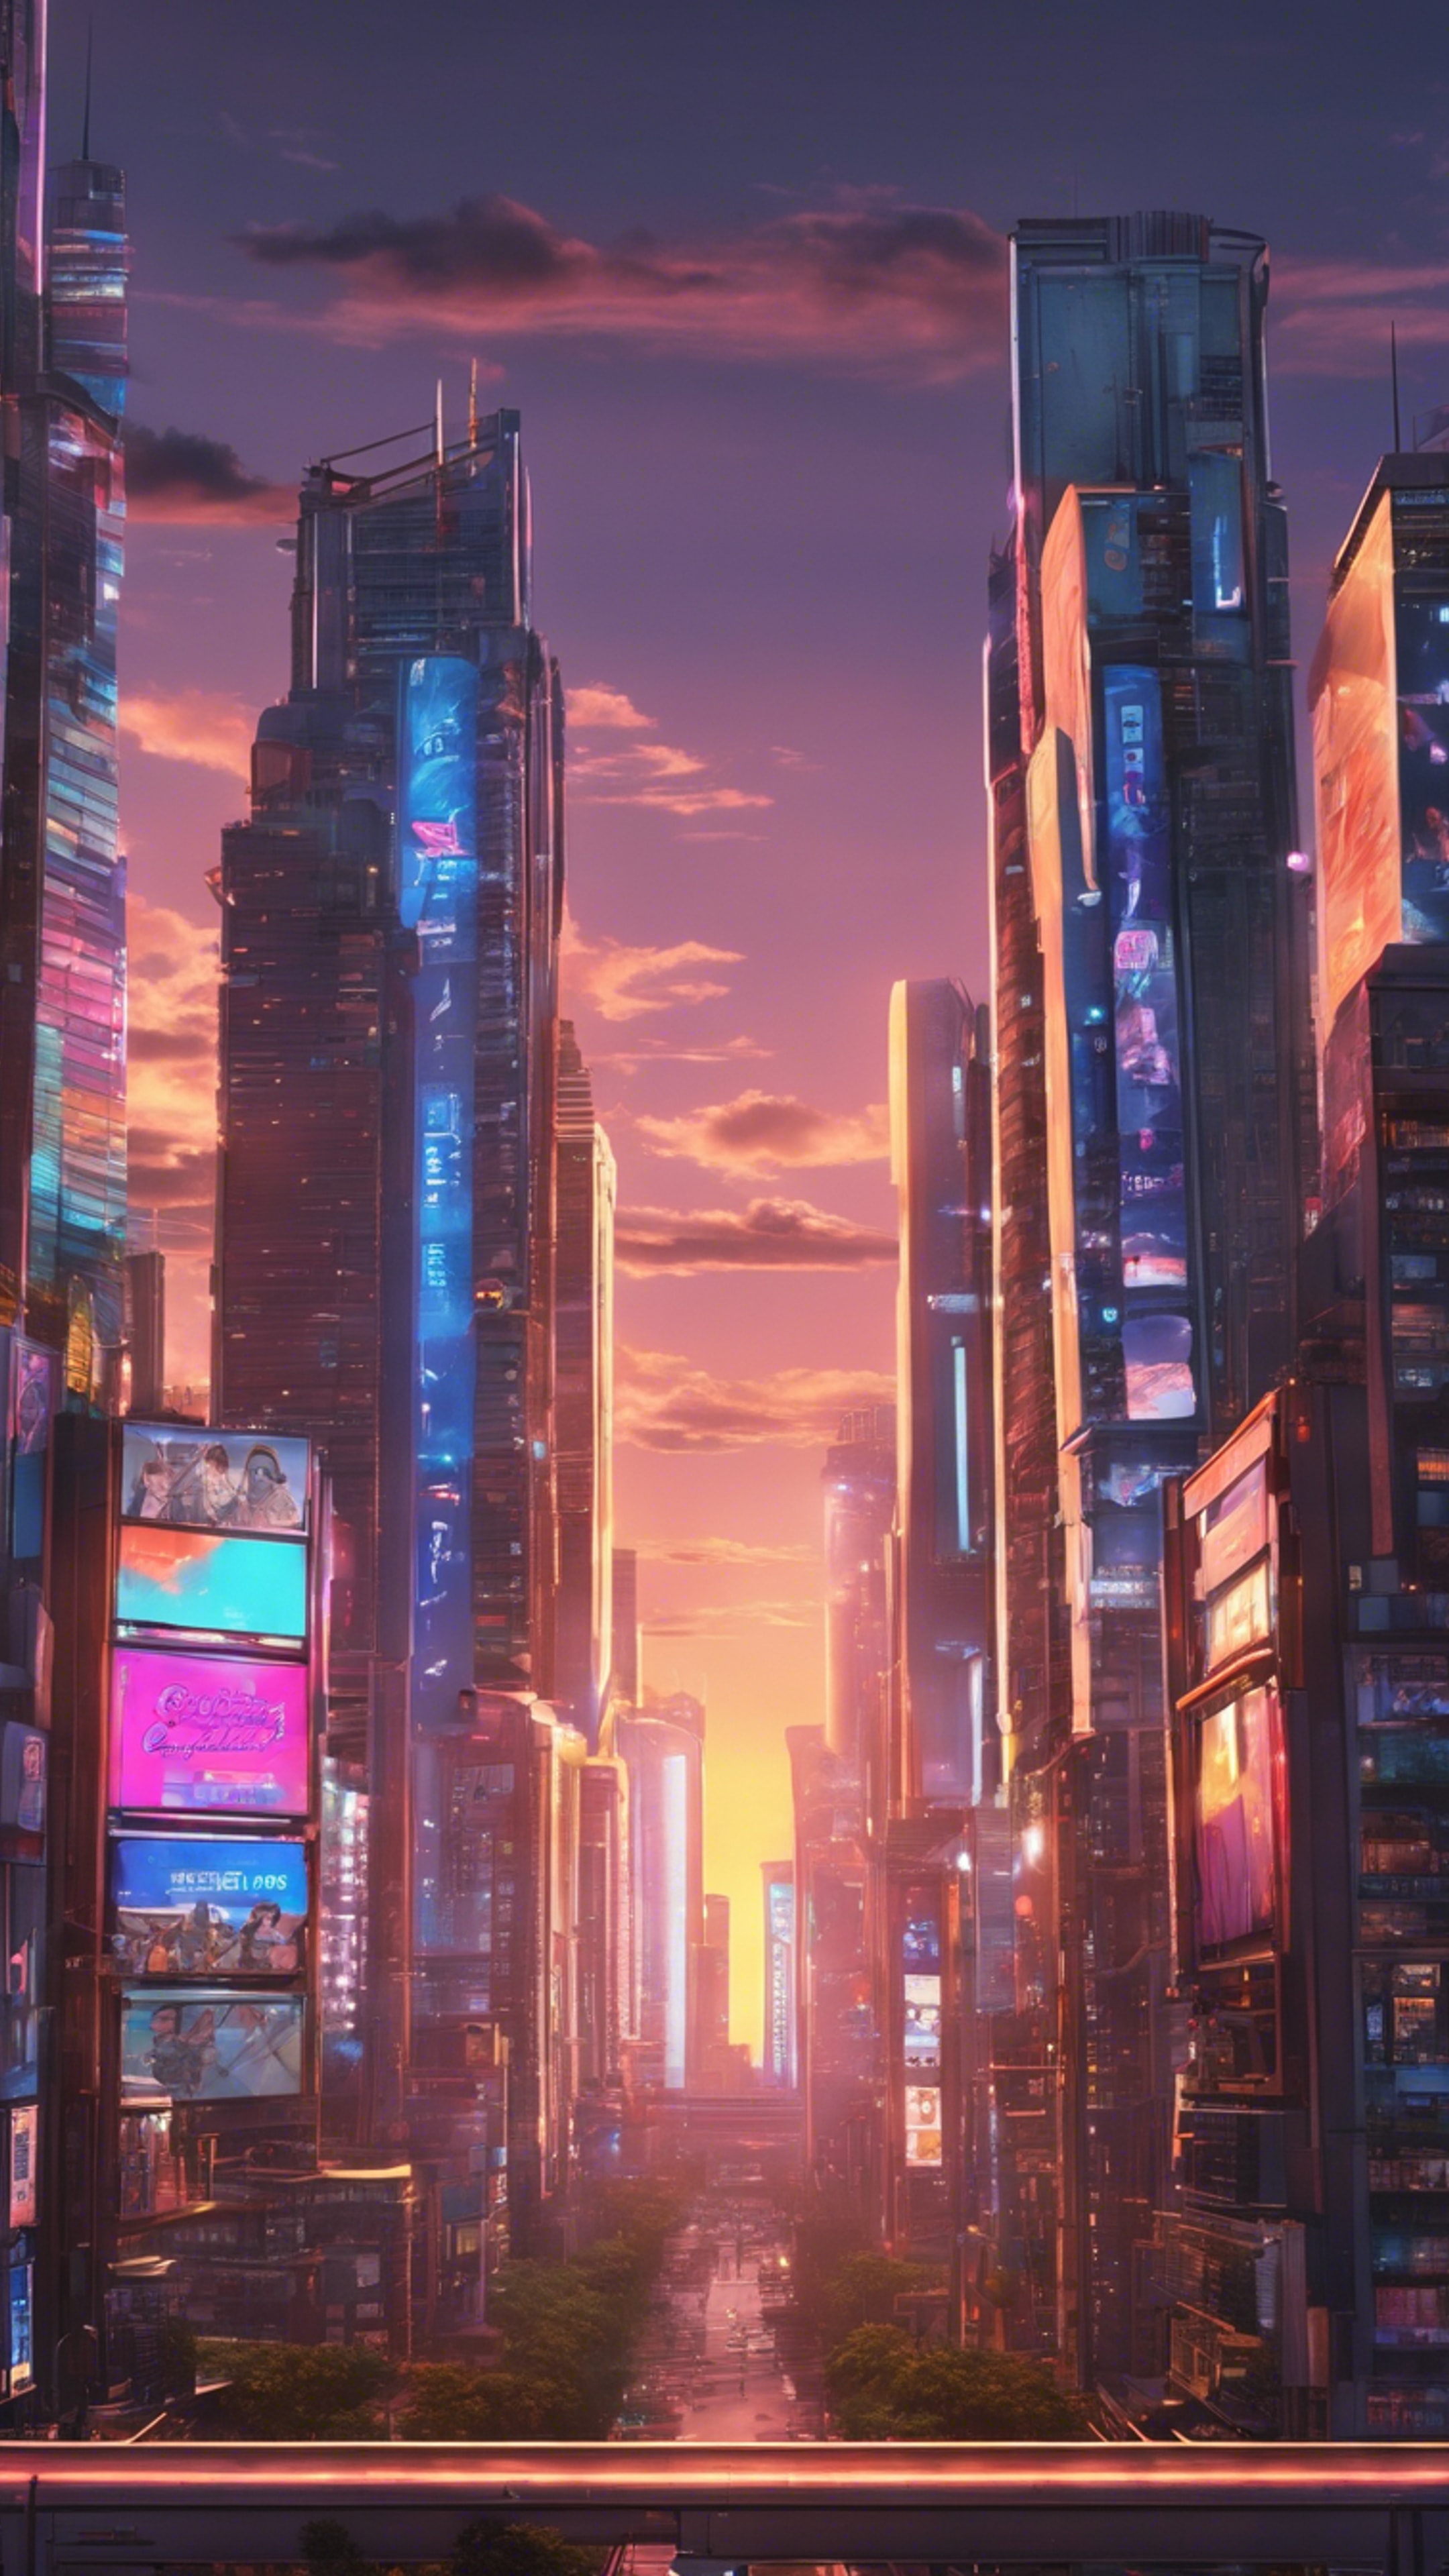 A cool anime-themed cityscape at sunset with towering skyscrapers and glowing neon billboards. Behang[63ed83801d984cce89ed]